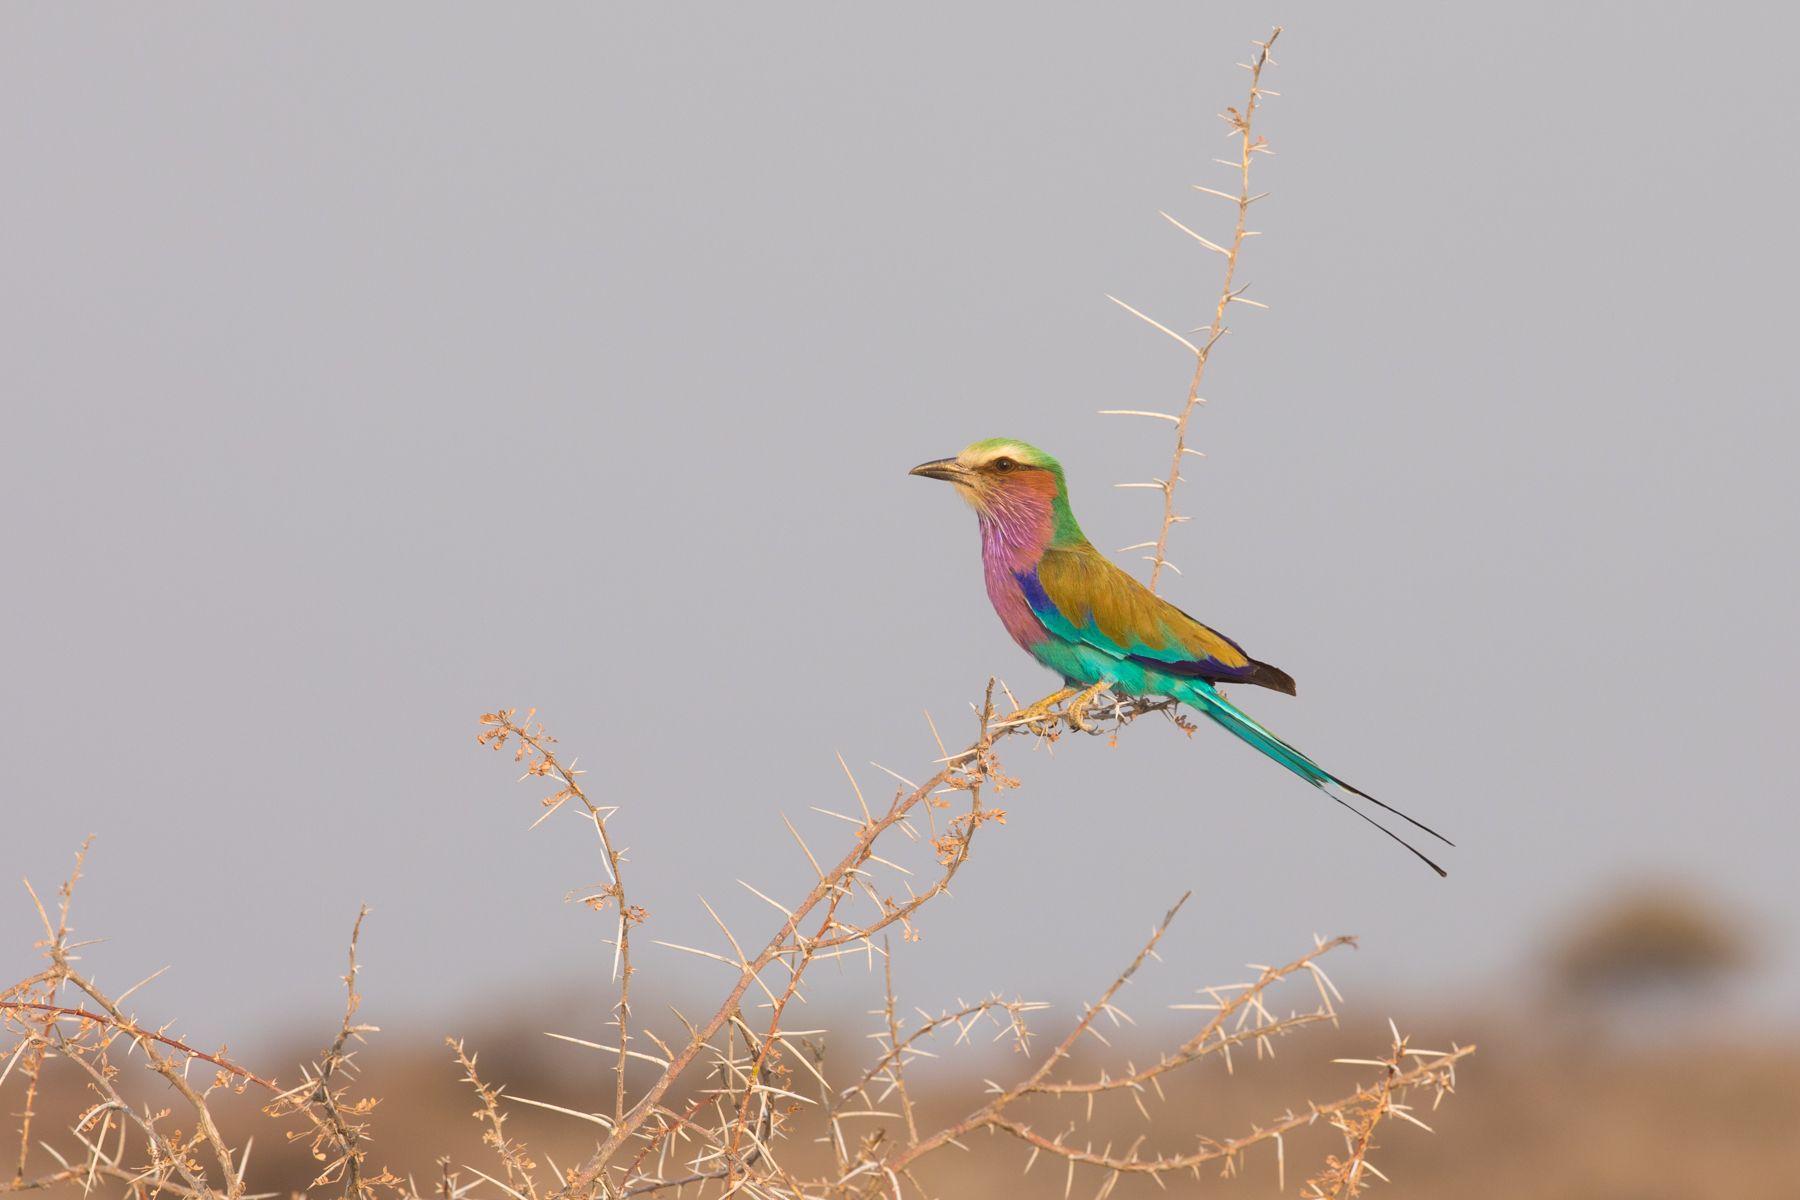 Lilac-breasted Rollers are always a highlight of our wildlife photography tours in Namibia